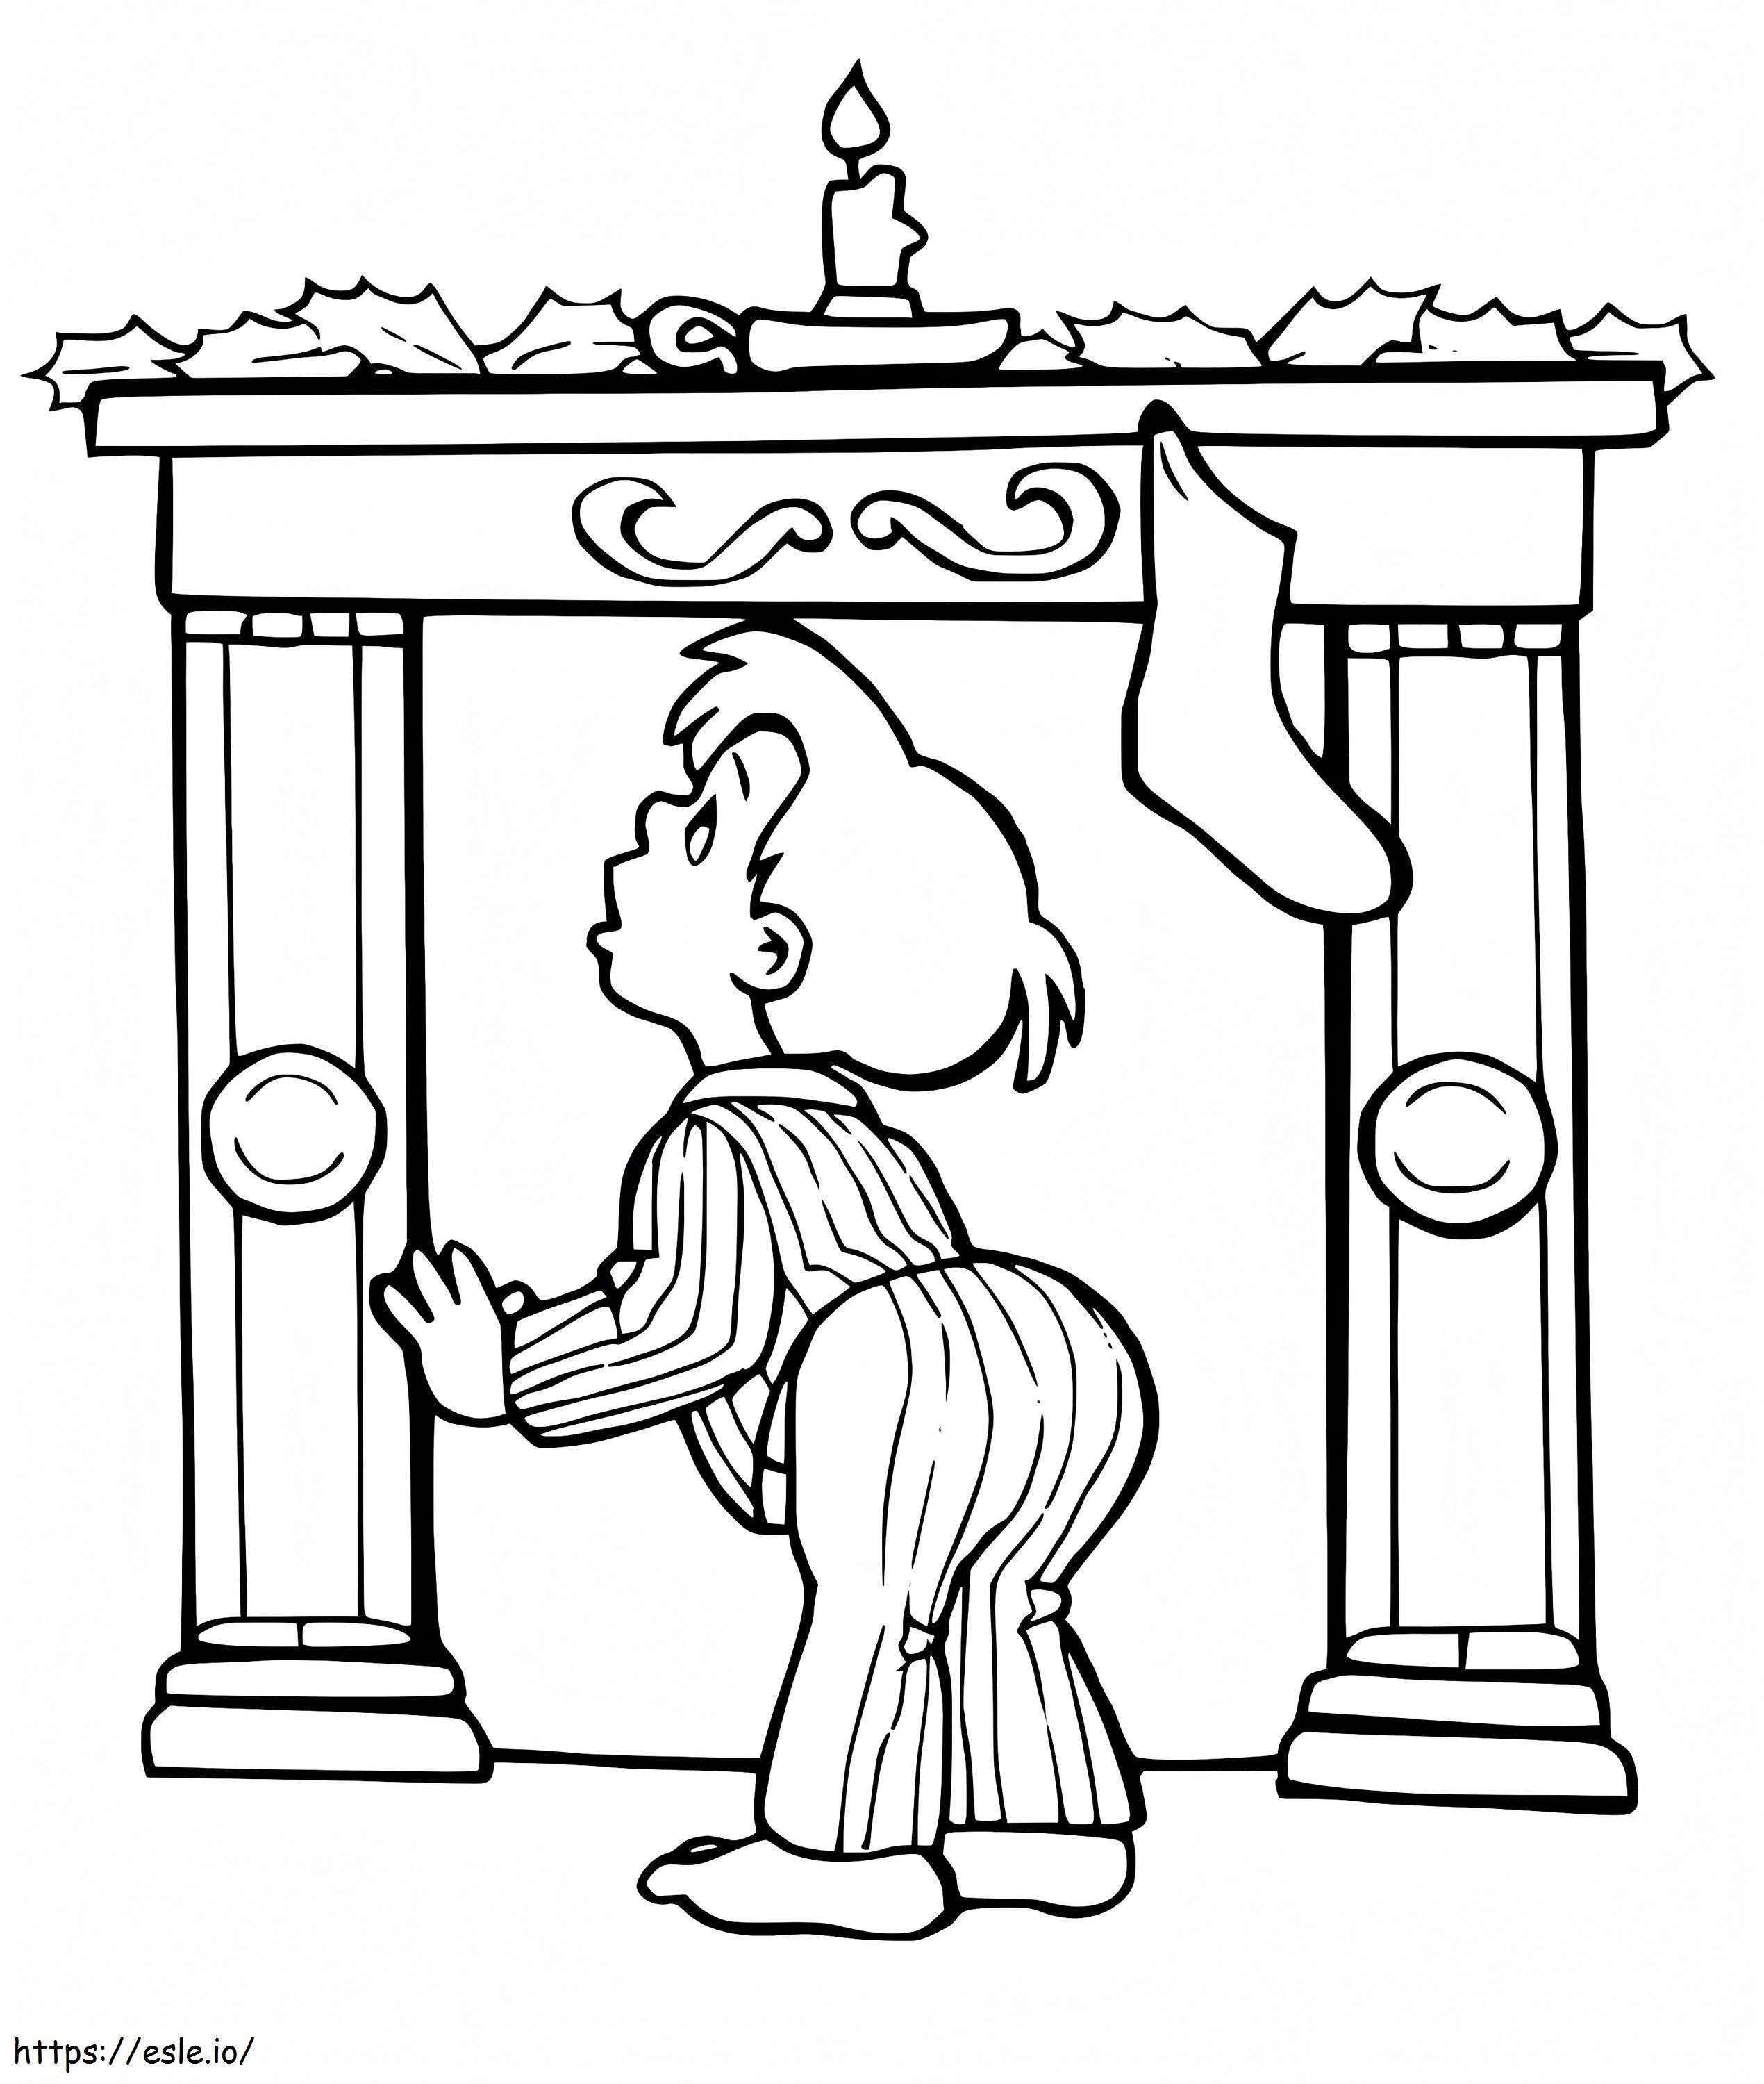 Boy And Fireplace coloring page